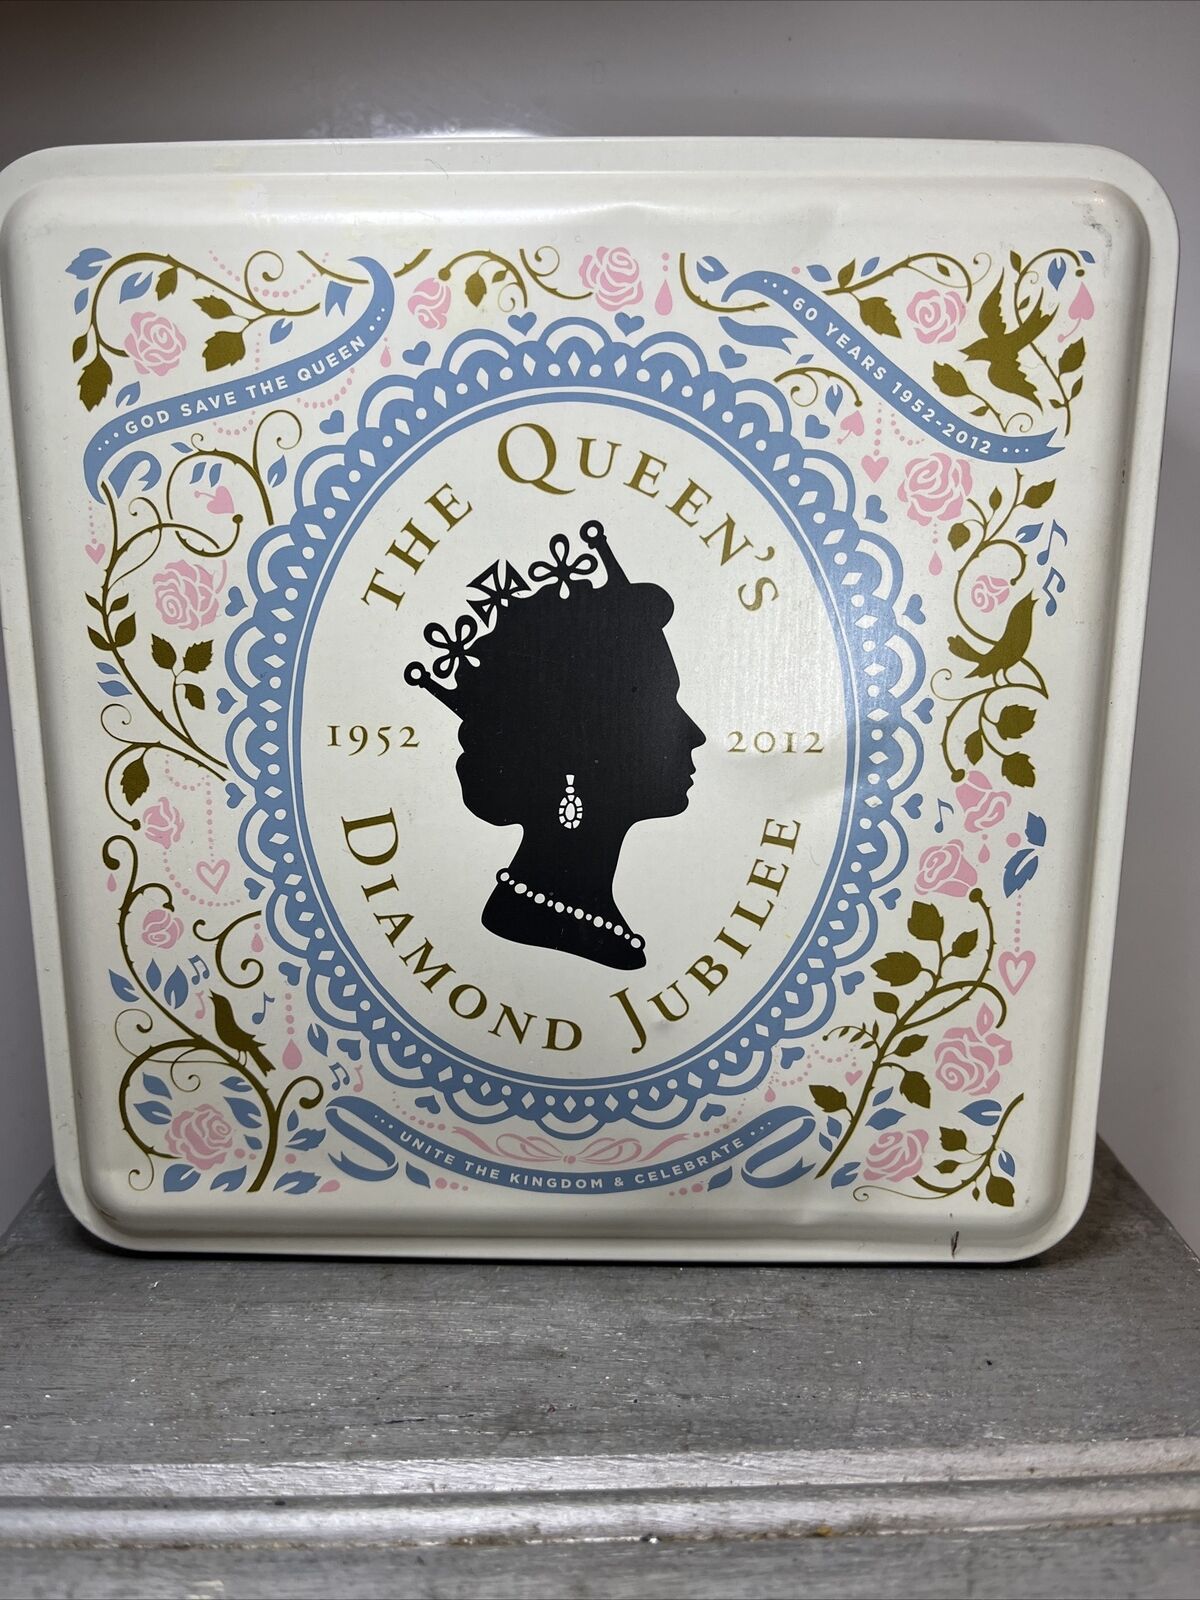 The Queen\'s Diamond Jubilee 2012 EMPTY Collectable Tin Container Display